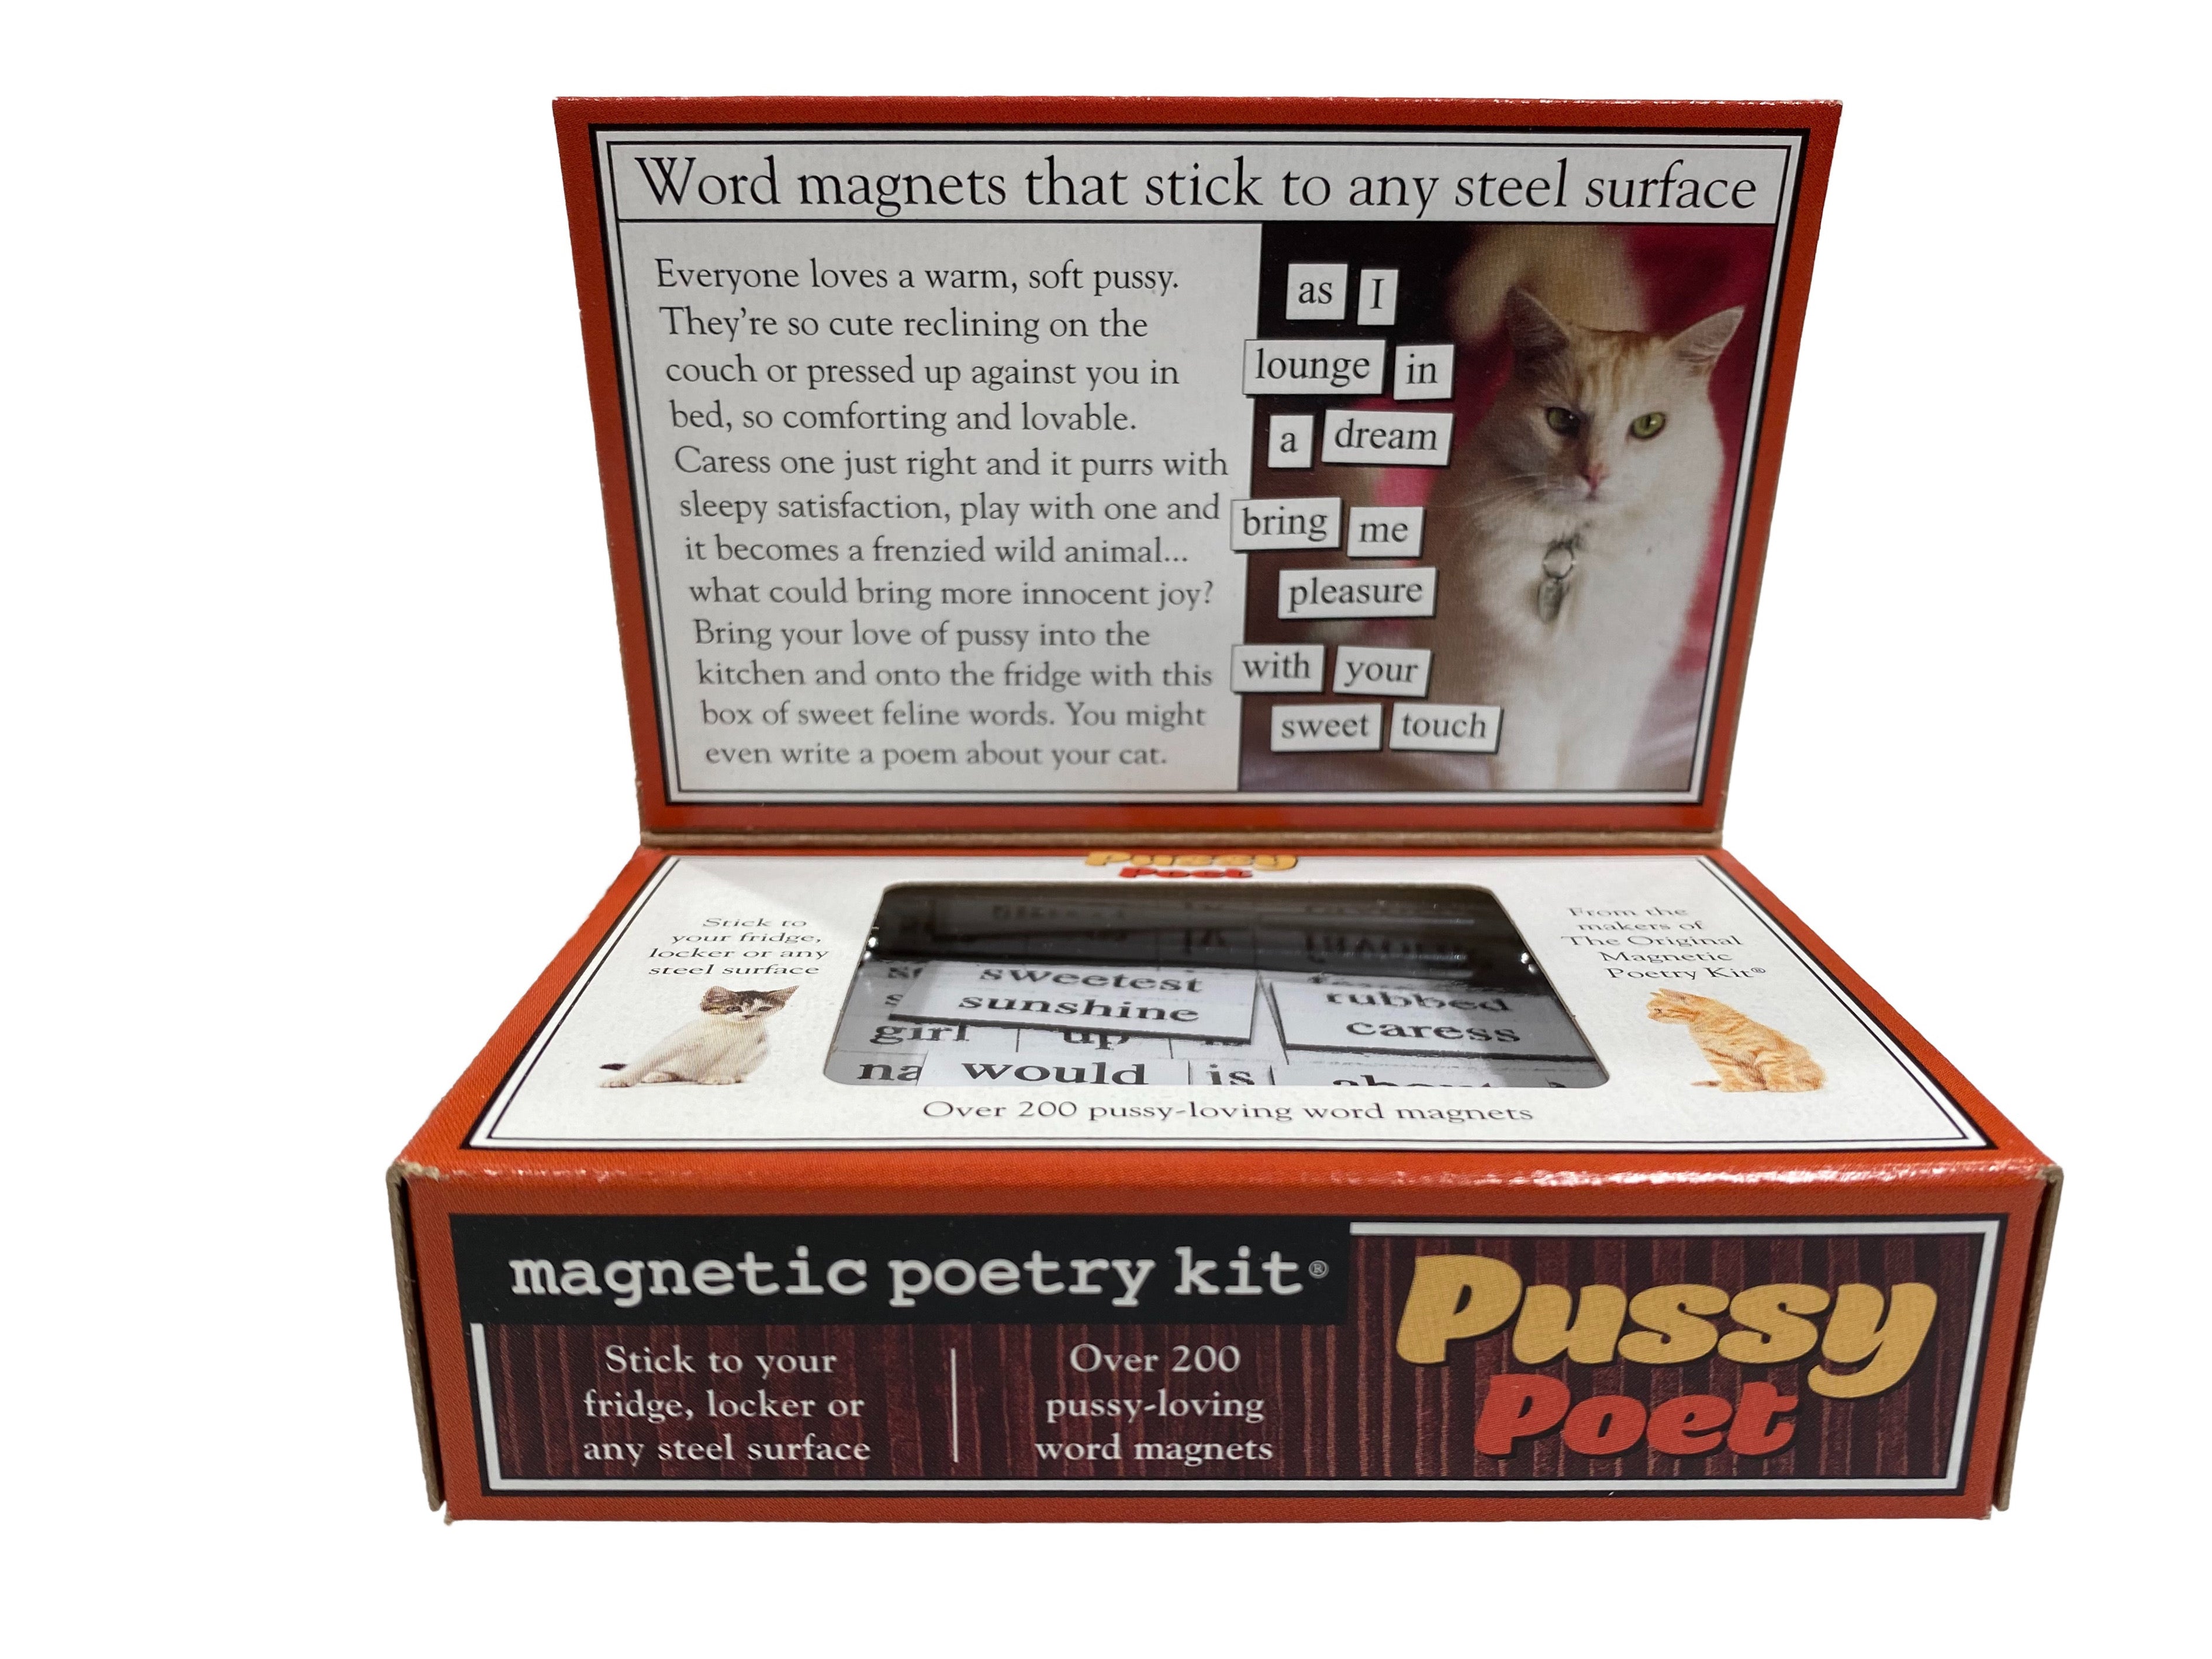 Magnetic Poetry - Pussy Poet    